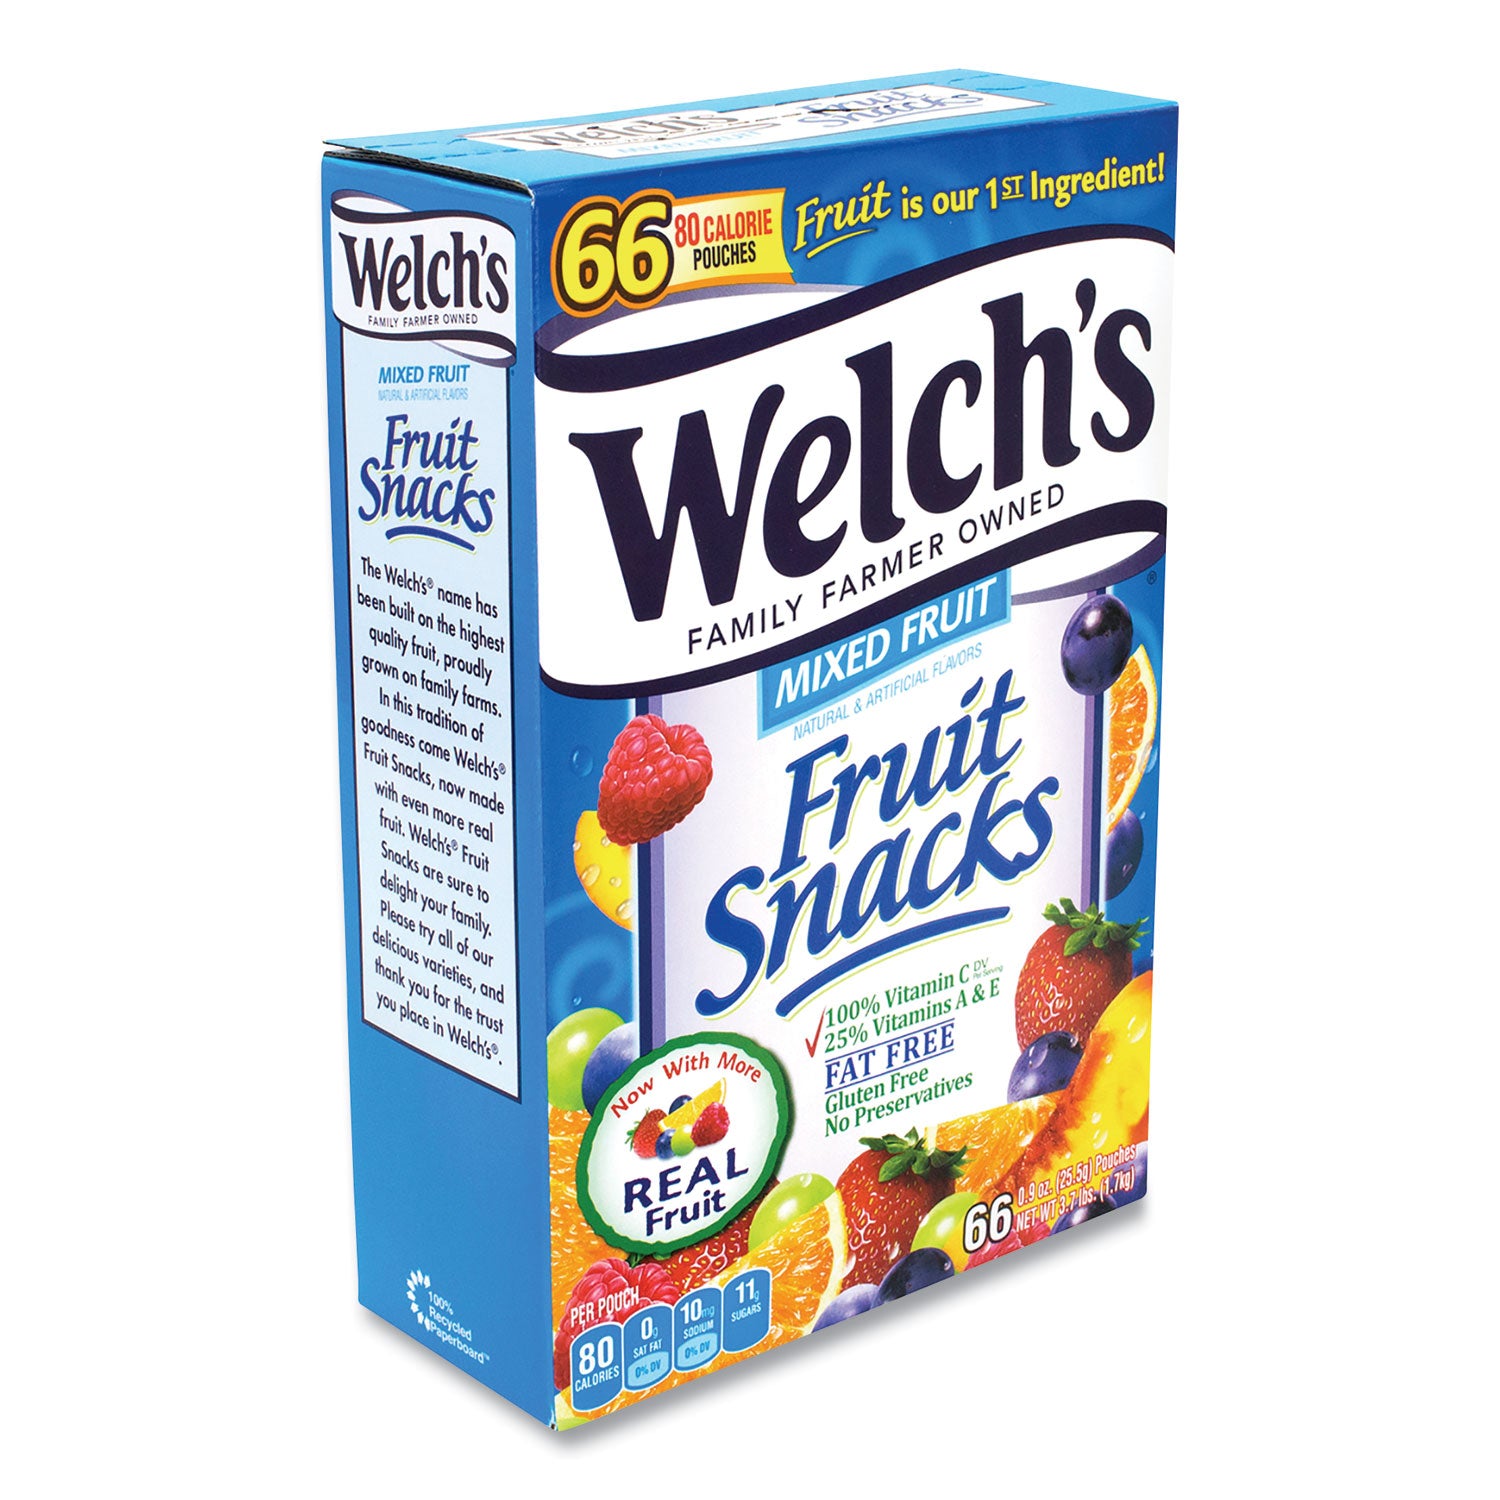 fruit-snacks-mixed-fruit-09-oz-pouch-66-pouches-box-ships-in-1-3-business-days_grr20900320 - 1